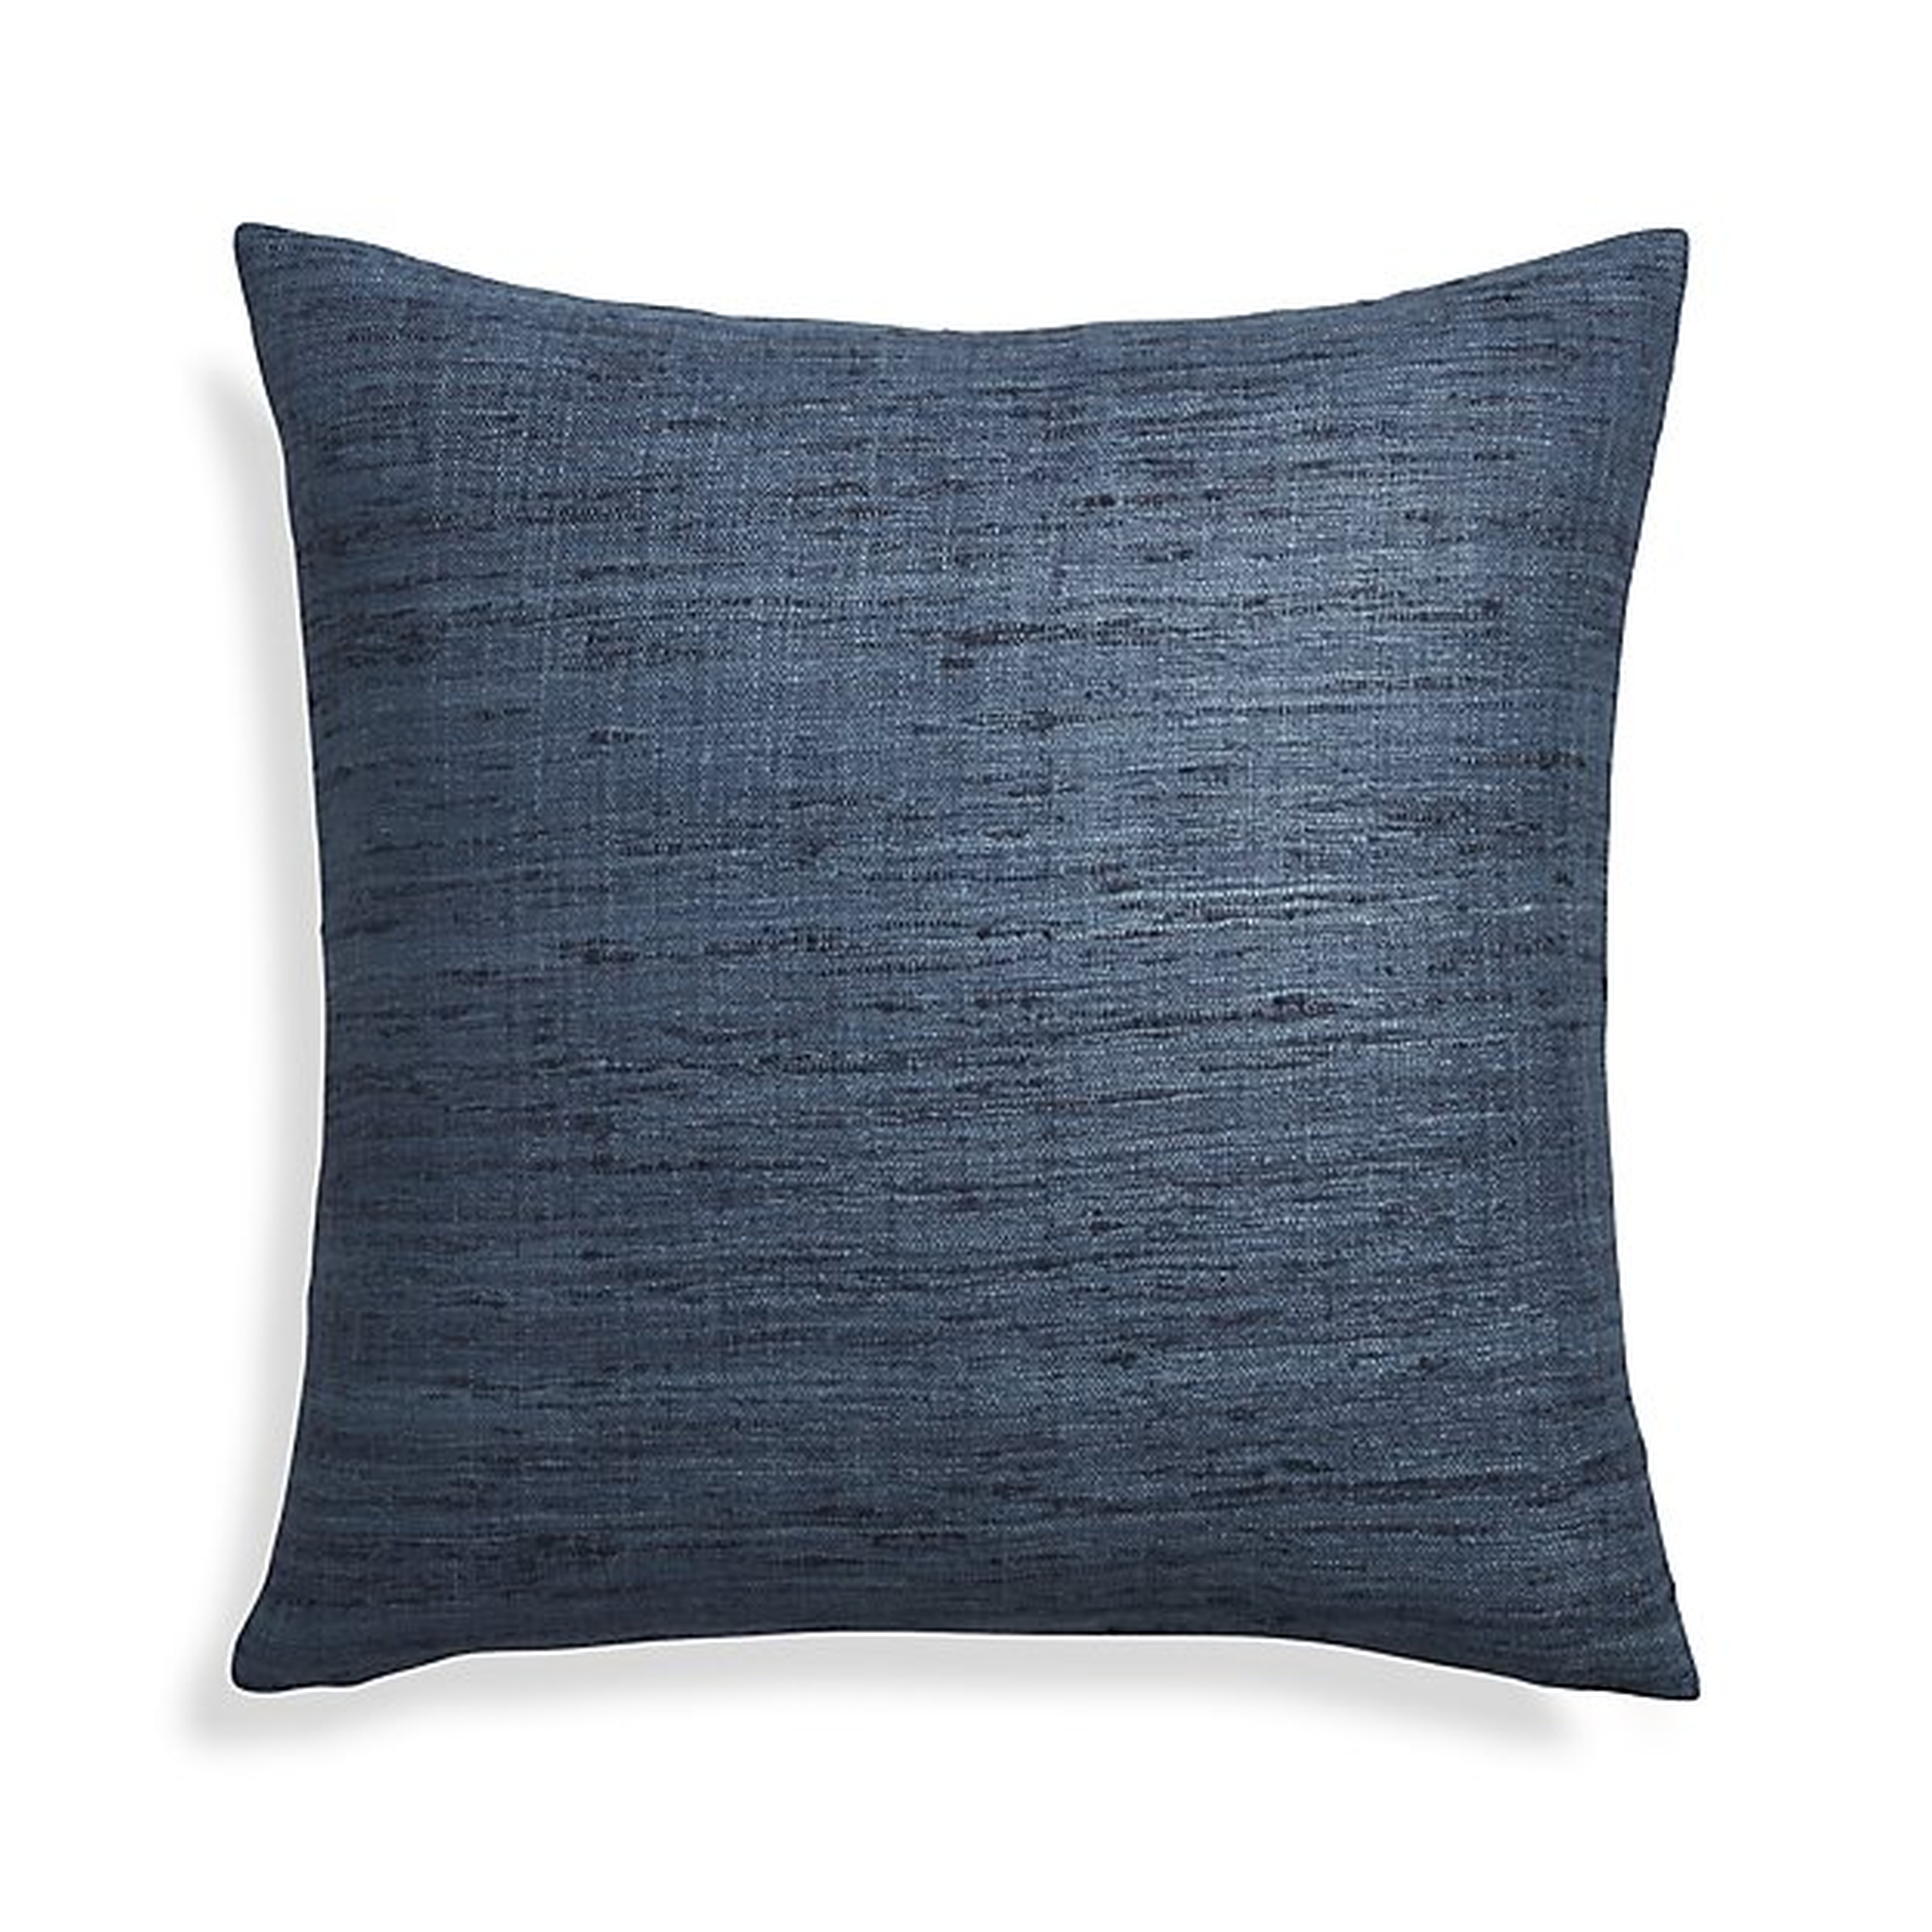 Trevino Delfe Pillow with Down-Alternative Insert, Blue, 20" x 20" - Crate and Barrel